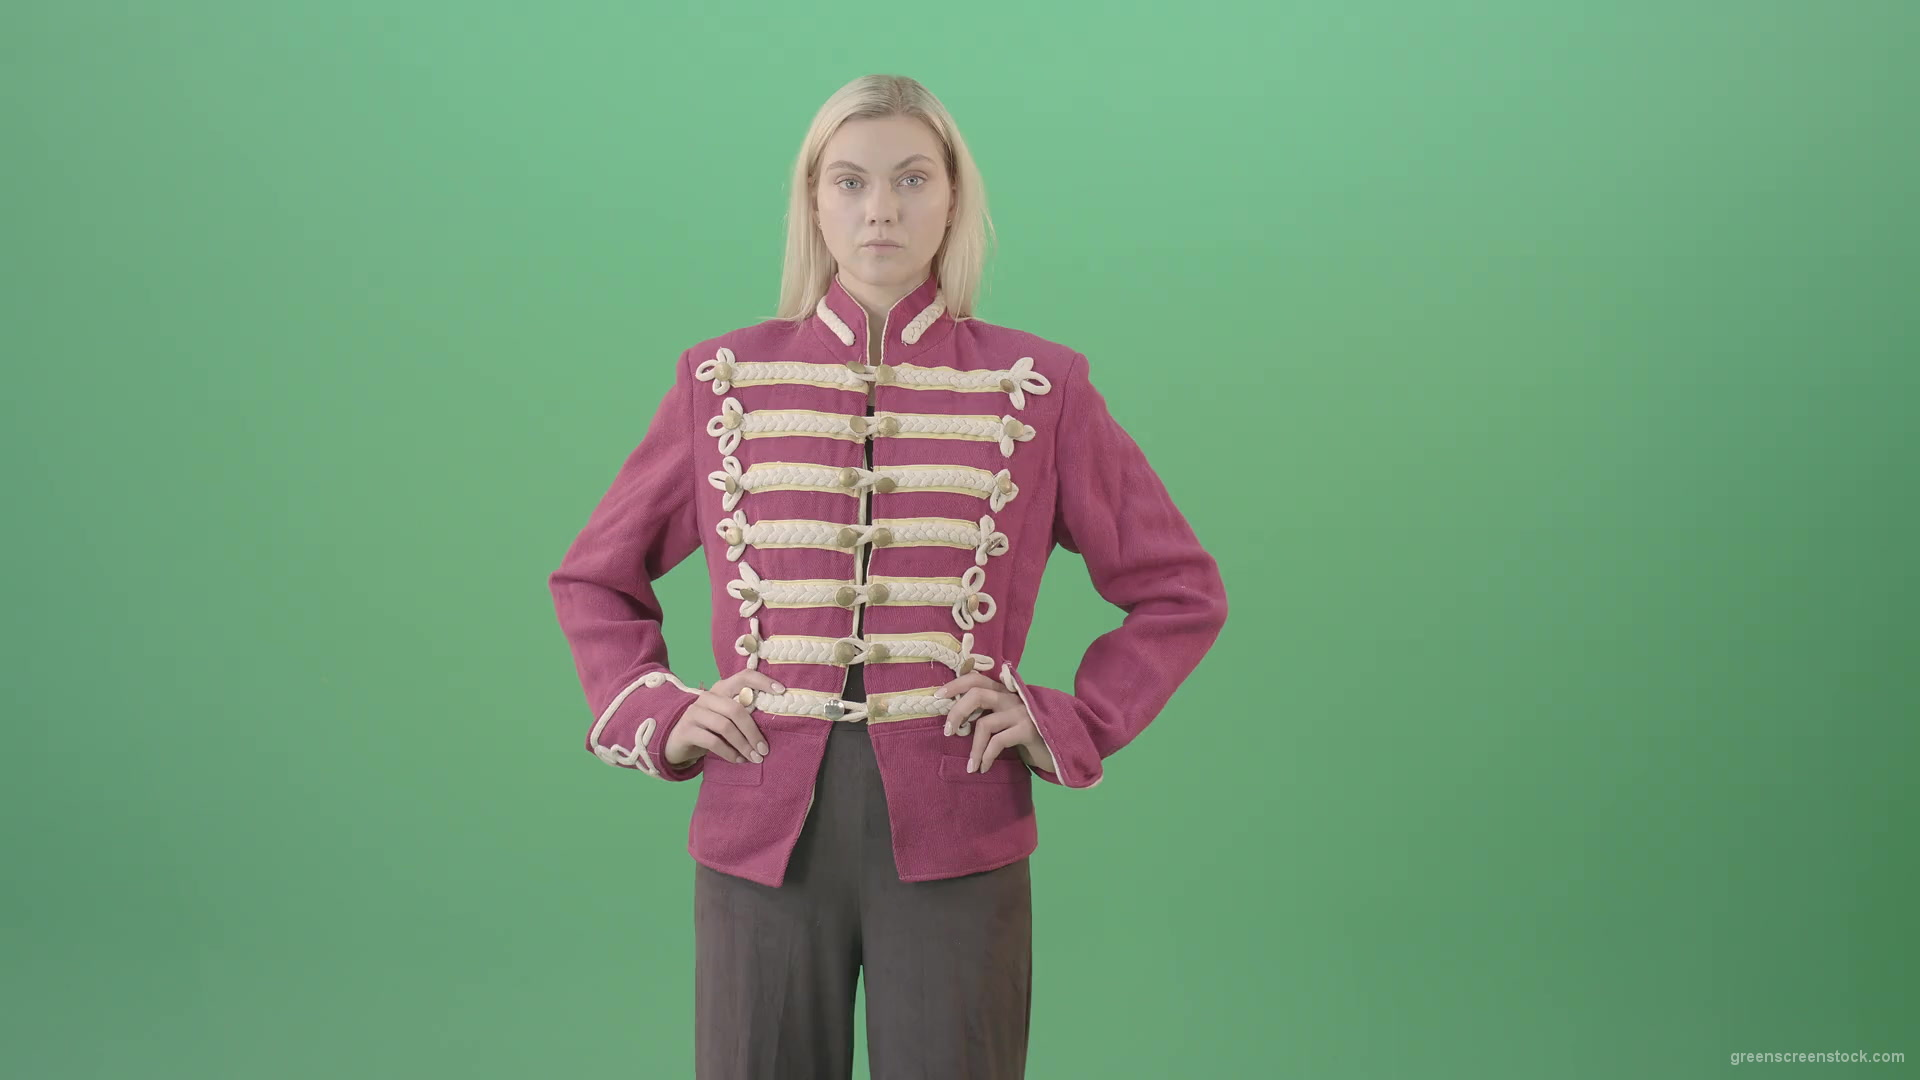 Blonde-Girl-in-Imperial-Royal-uniform-posing-and-shows-photomodel-gestures-isolated-on-Green-Screen-4K-Video-Footage-1920_001 Green Screen Stock